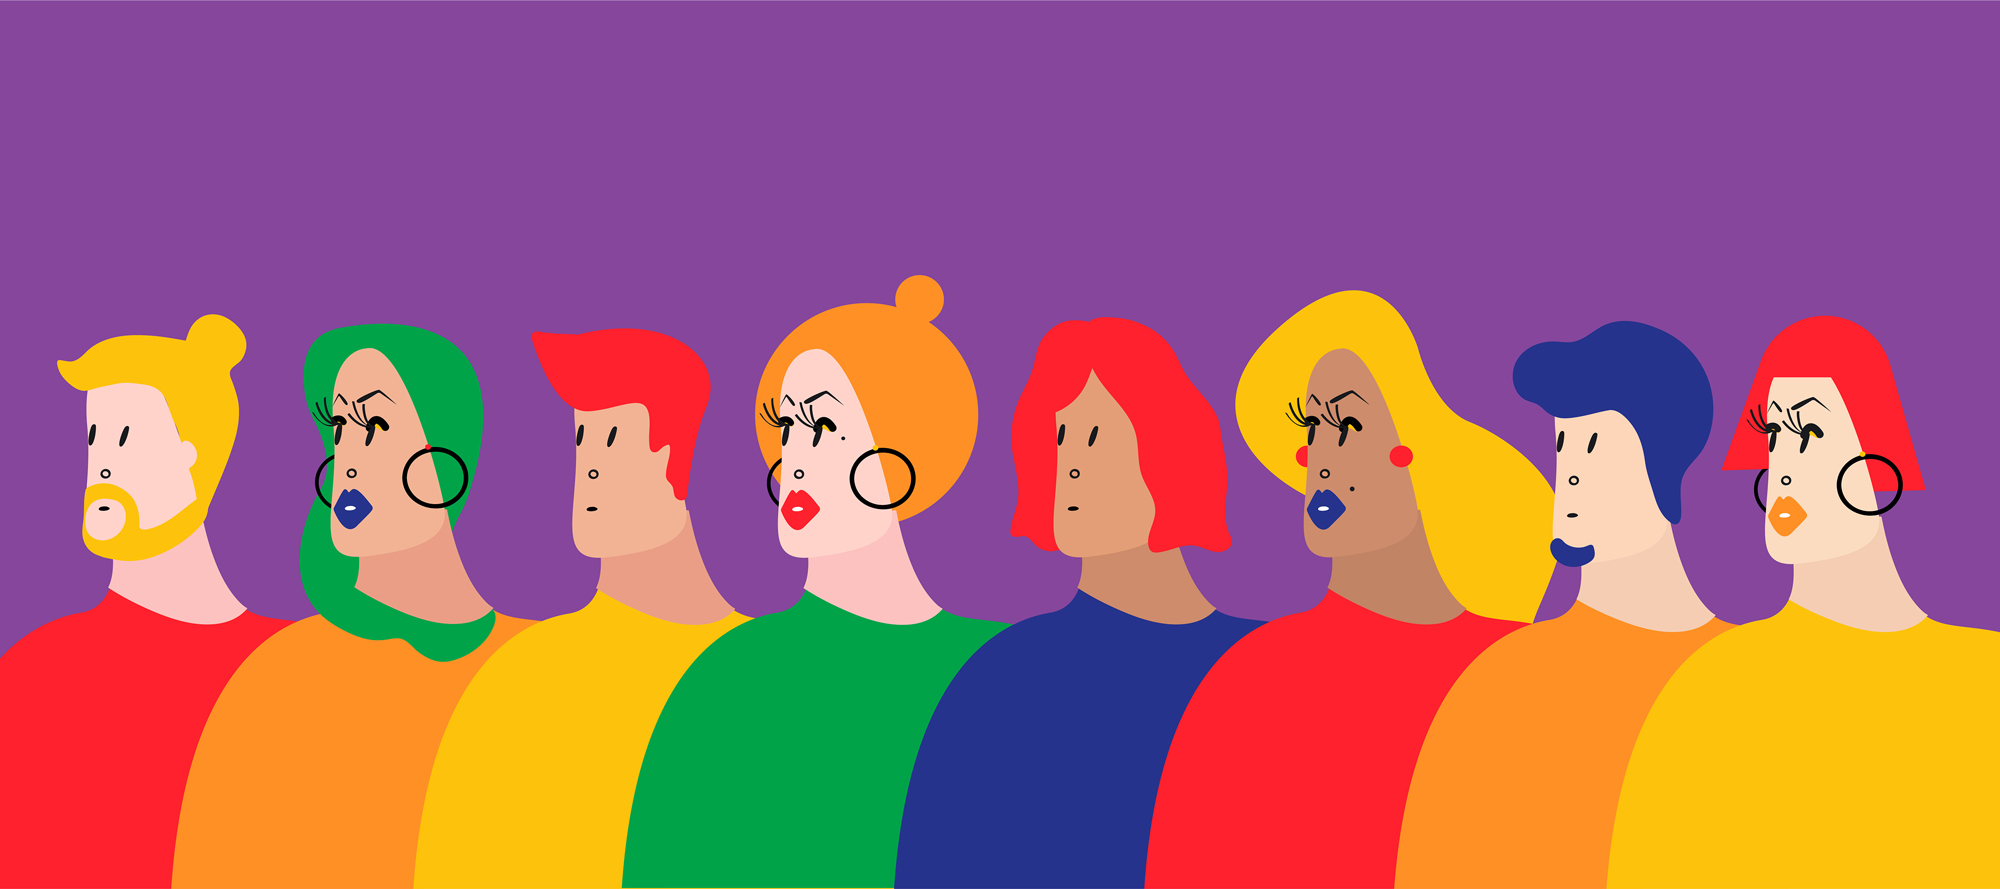 An illustration of eight people with different hair colors and identities